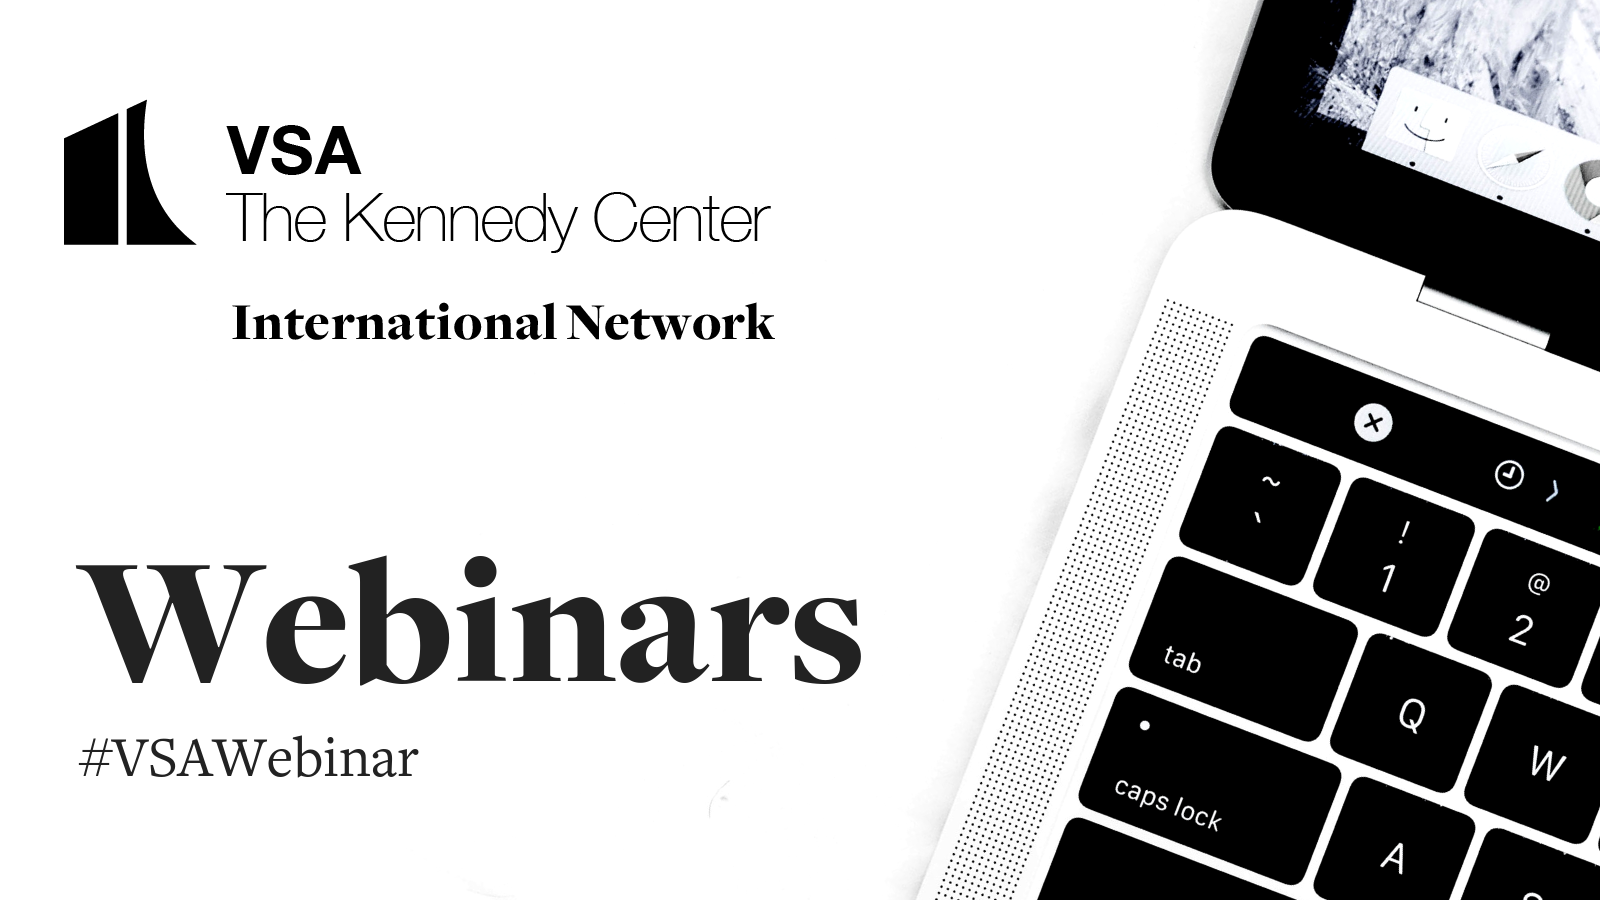 A white graphic with black text and a portion of a silver and black laptop angled in the lower right corner. The text reads, “VSA”, “The Kennedy Center”, “International Network”, “Webinars”, “#vsawebinar